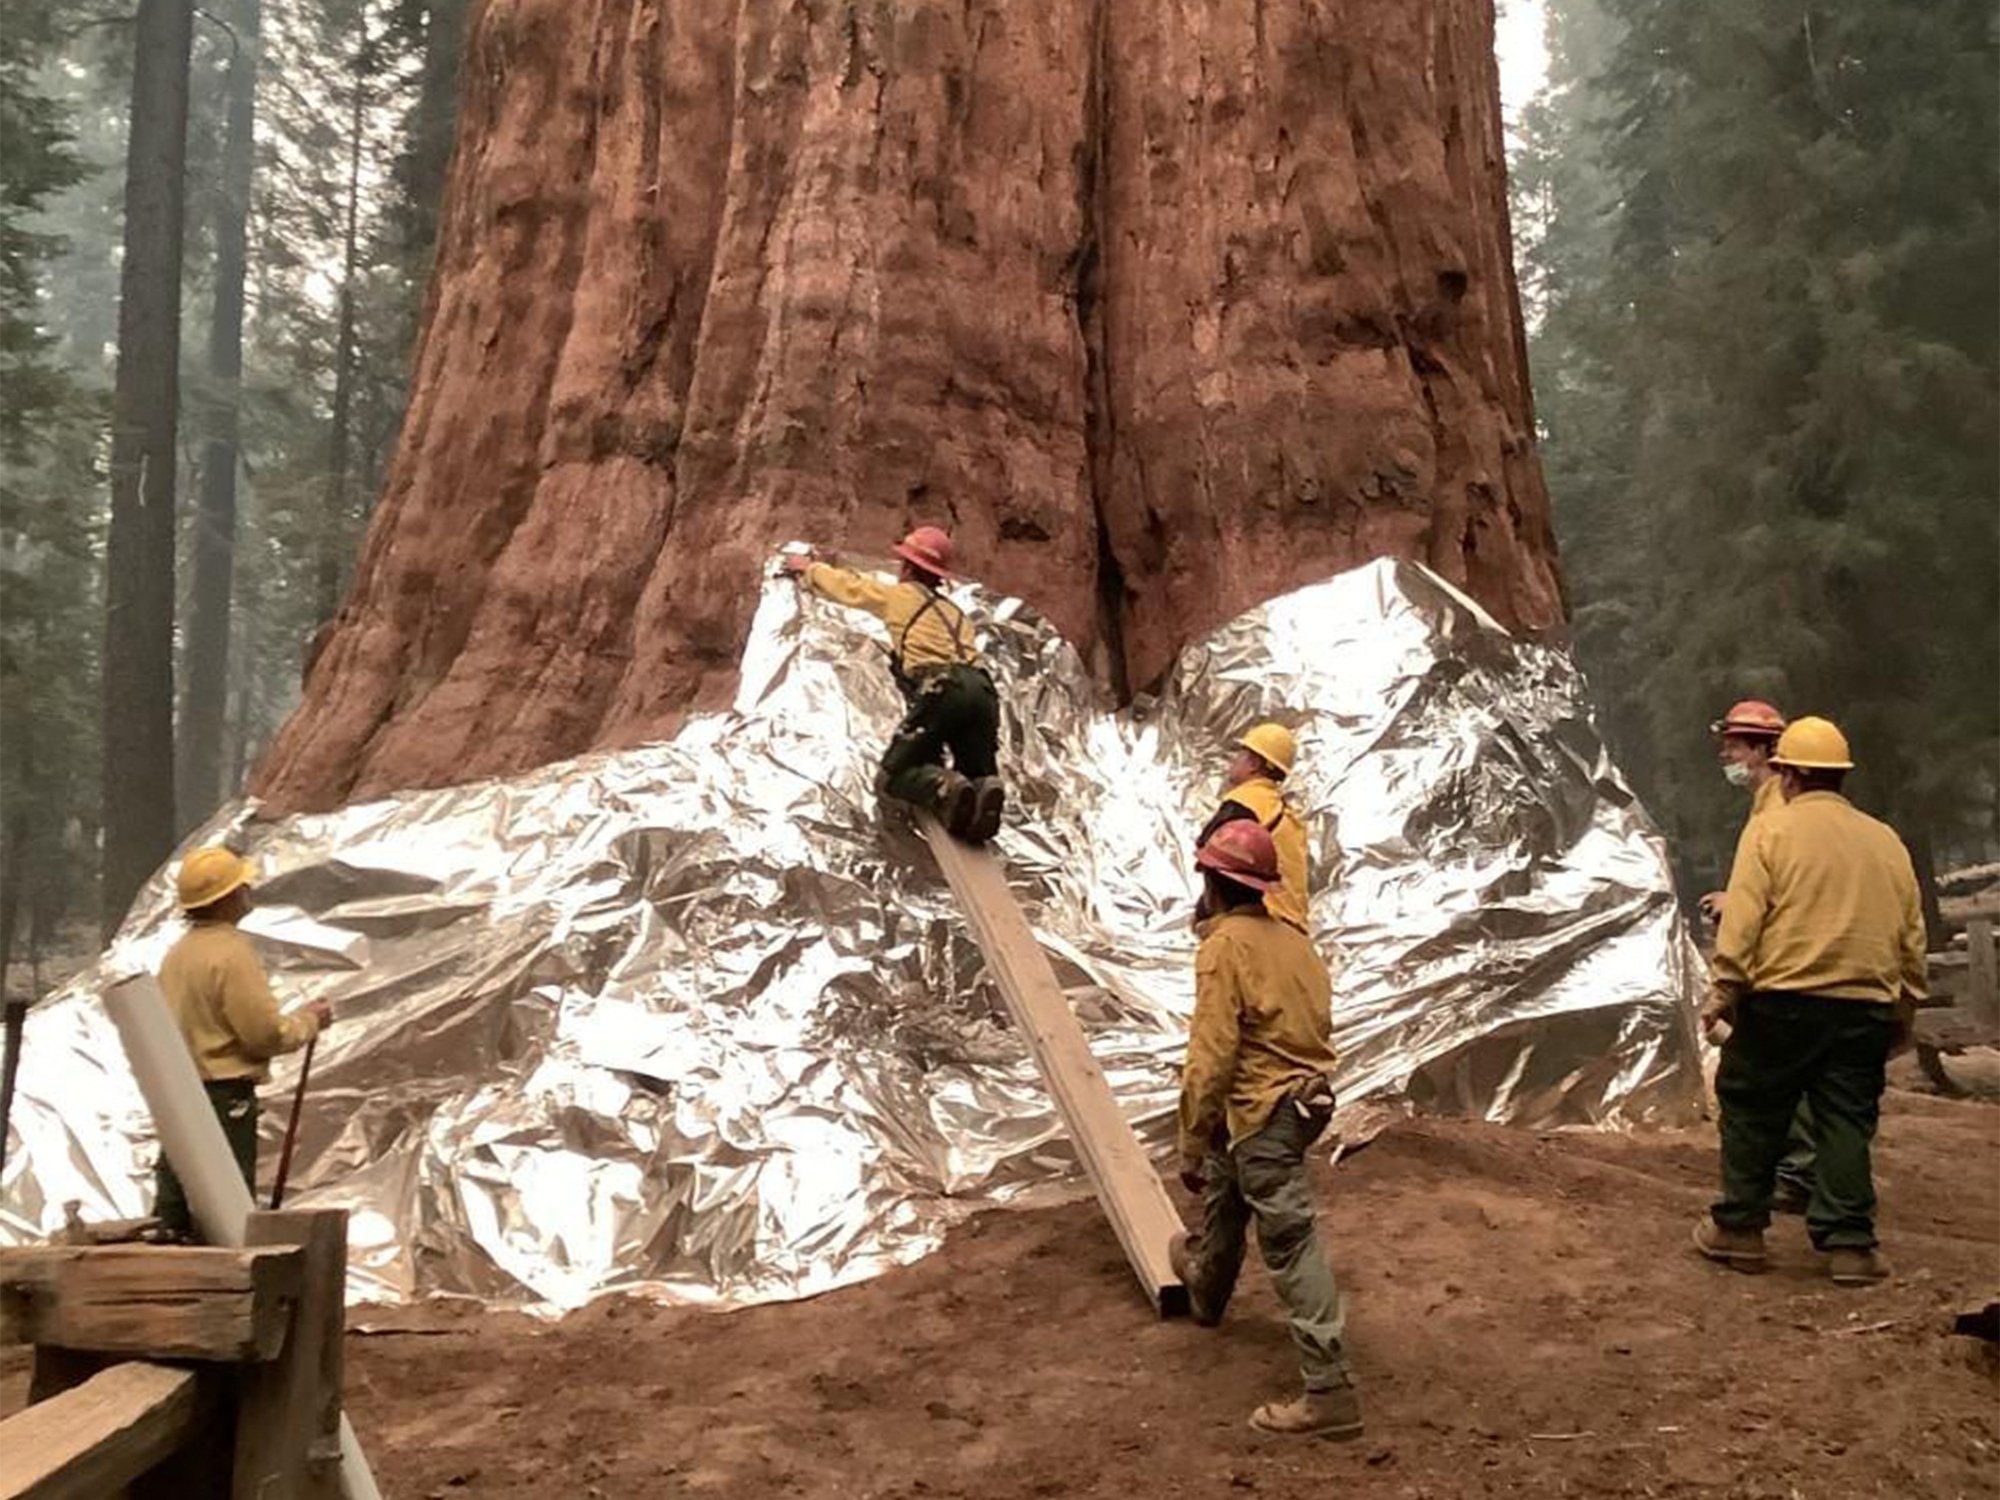 In this picture released by the National Park Service on Sept. 17, 2021, wildland firefighters apply structure wrap to giant sequoias on the KNP Complex fire in the Sequoia National Park, California, U.S. (NATIONAL PARK SERVICE via AFP)